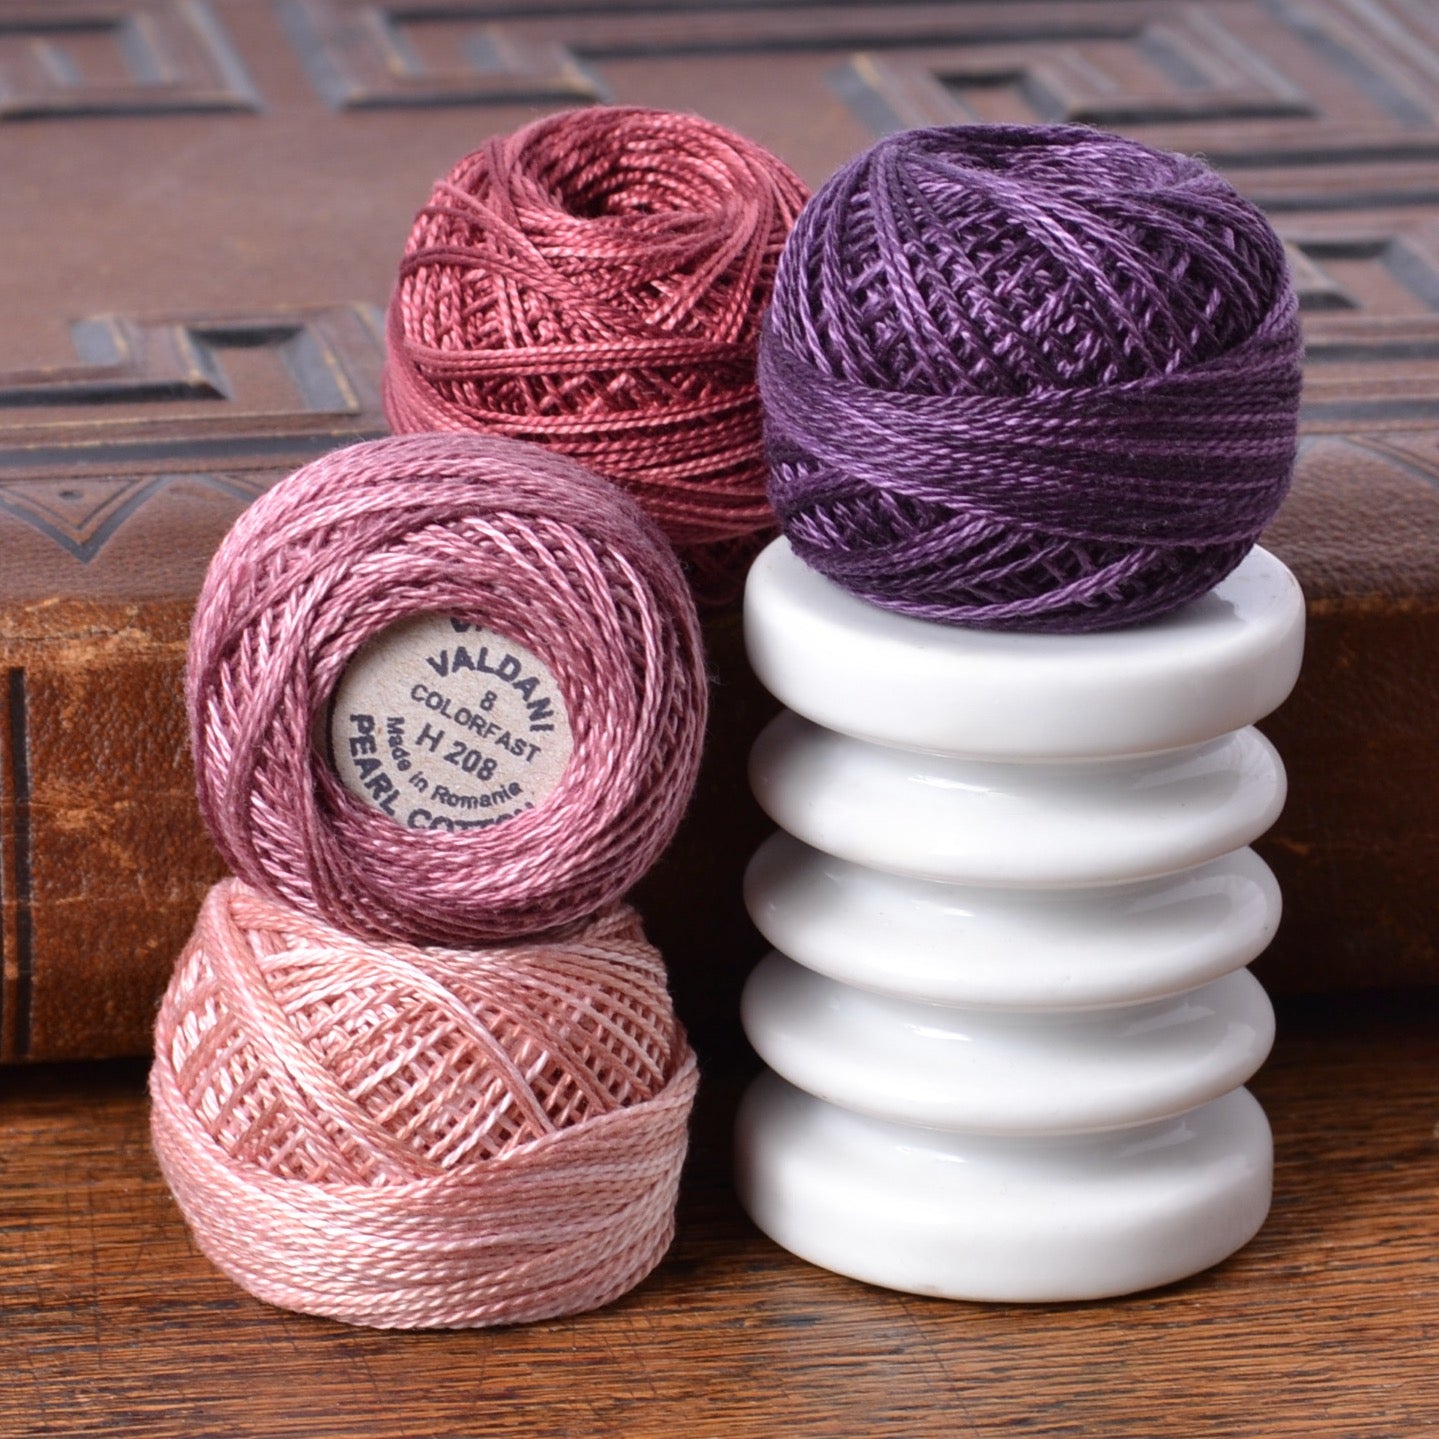 Perle cotton thread, Purples and pinks